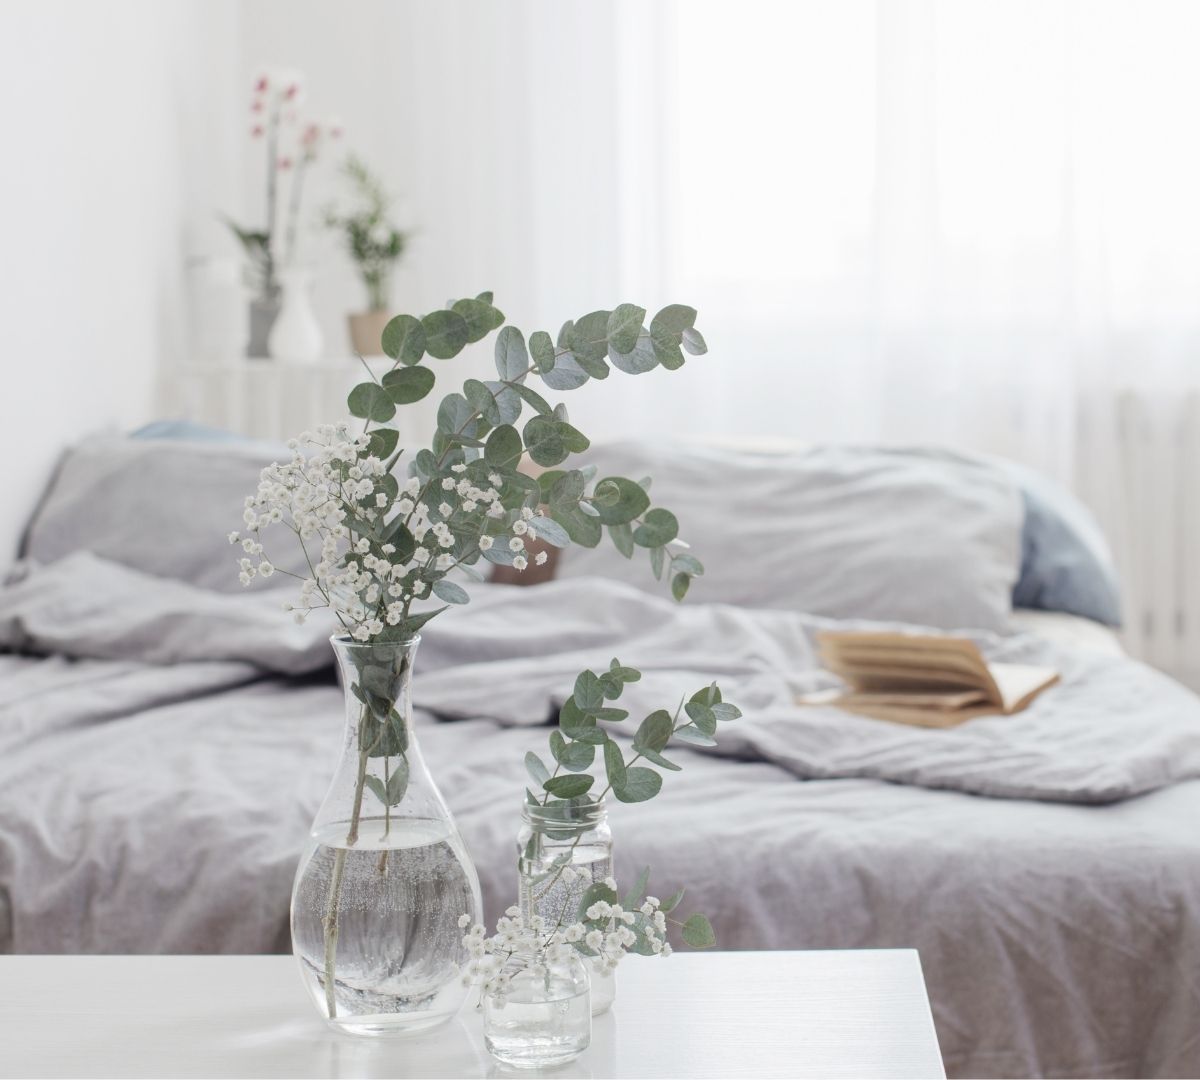 Linen or Eucalyptus: Which is Best for Bedtime? - Touché